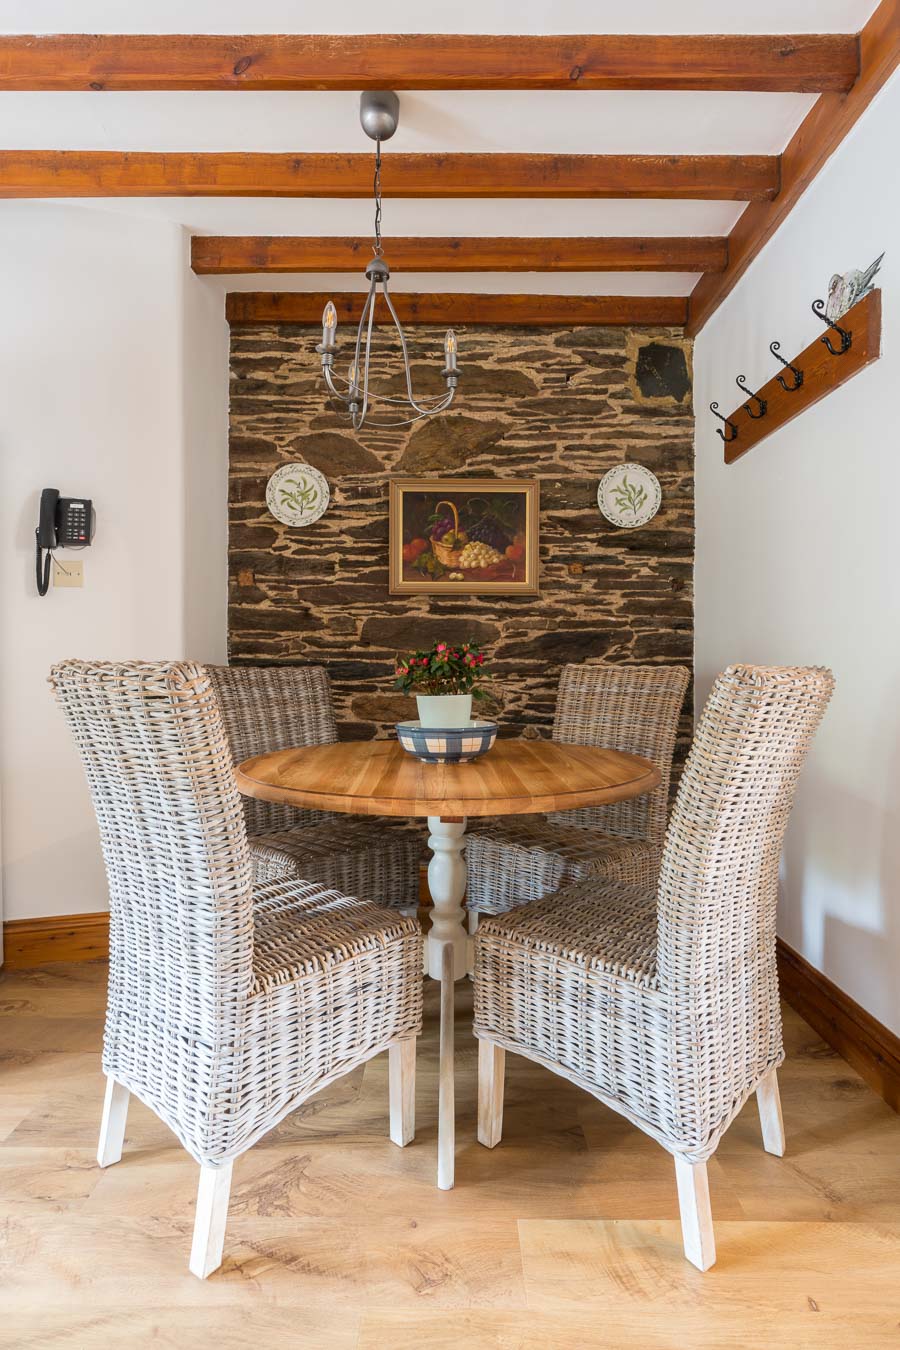 The dining table for four in Cartwheel cottage with wicker chairs and exposed brick work behind.  